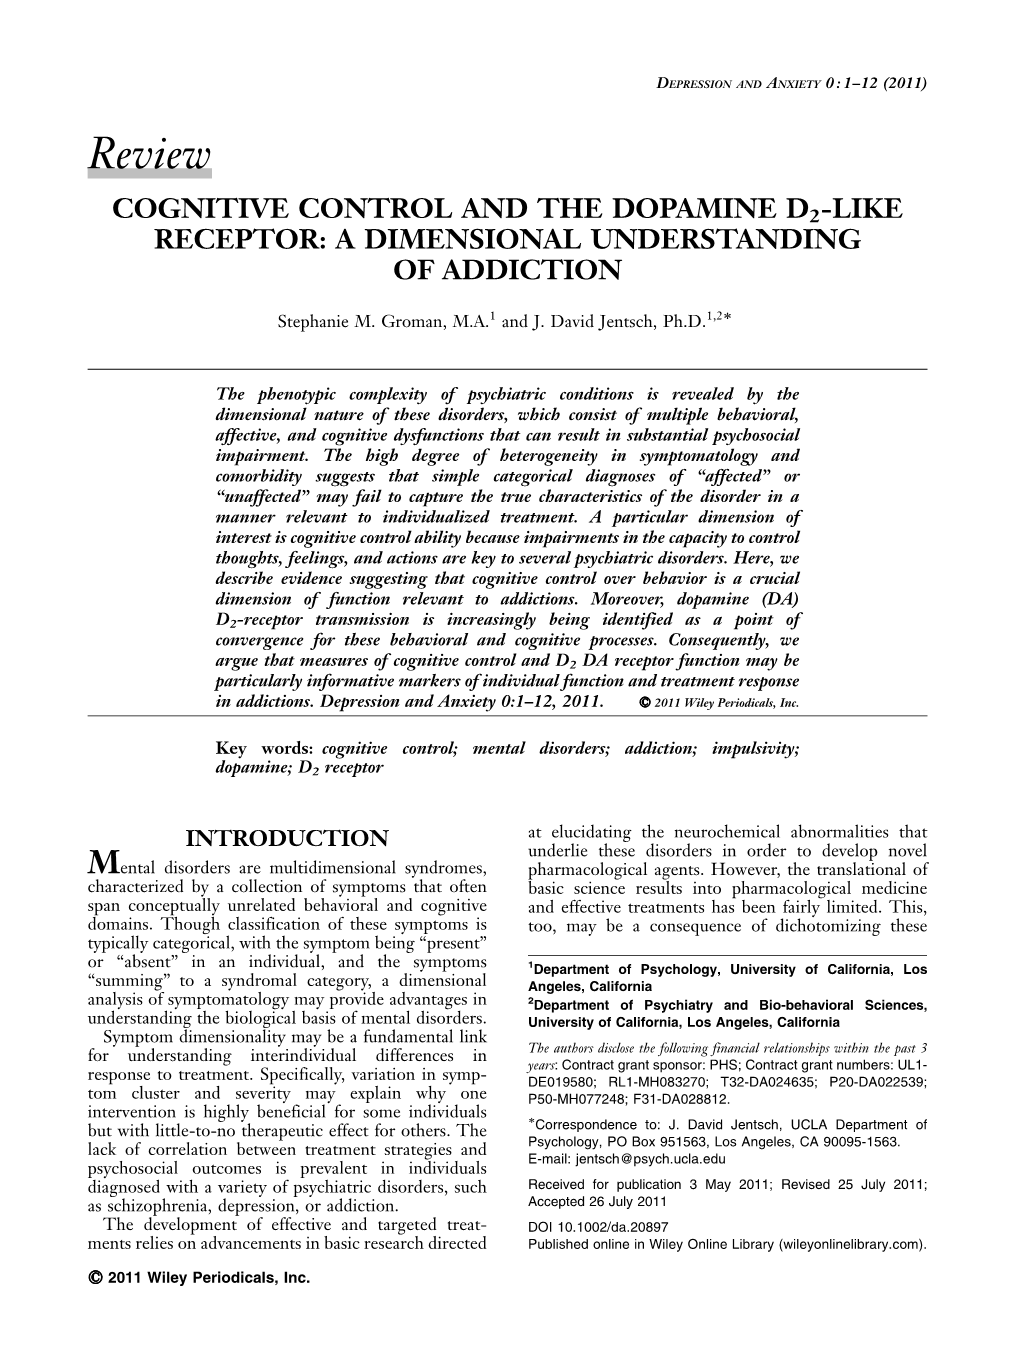 Cognitive Control and the Dopamine D2like Receptor